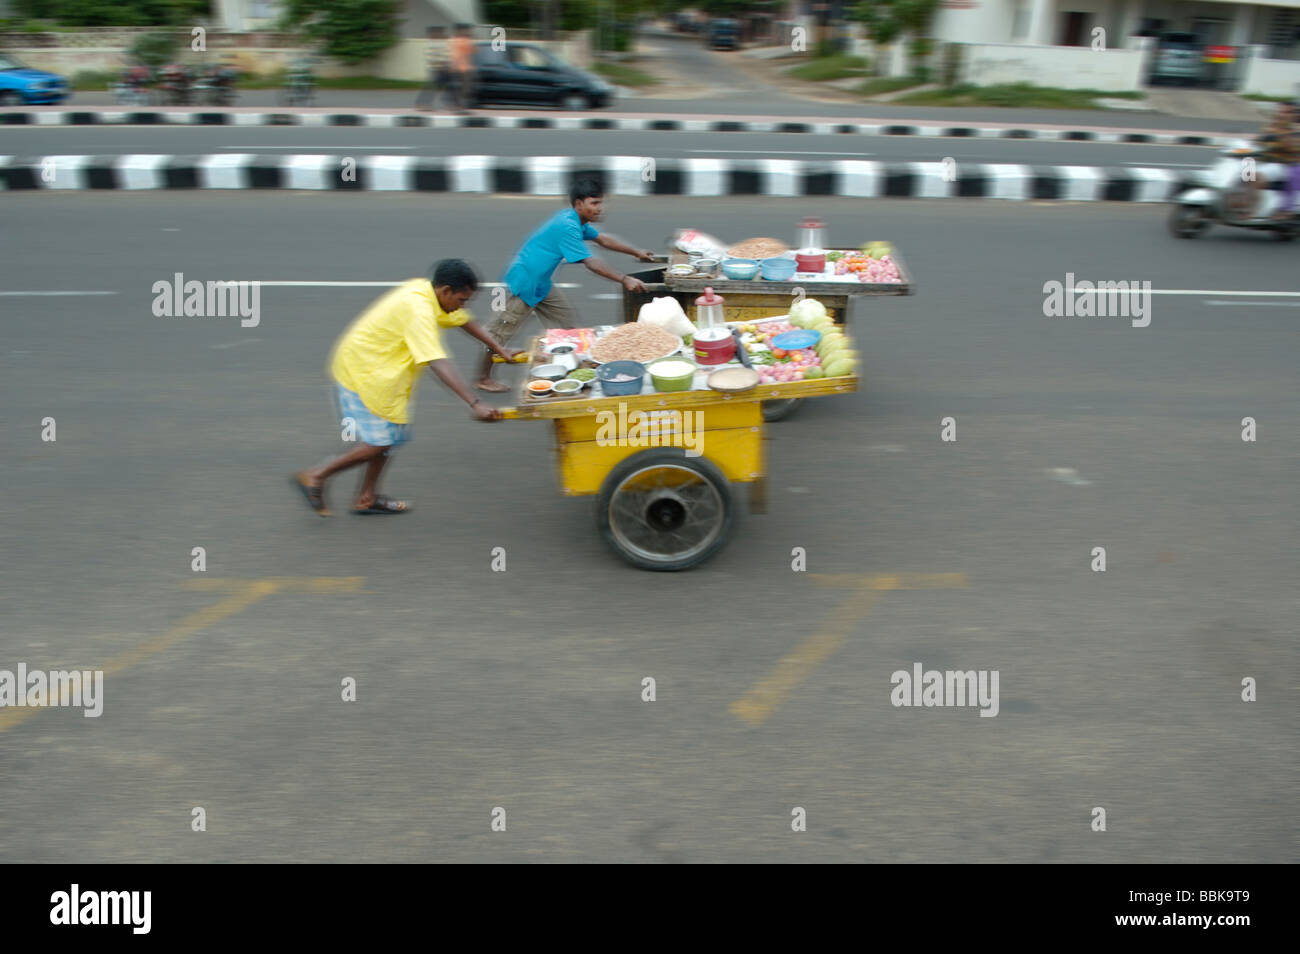 India, Tamil Nadu, Chennai (Madras). Small mobile shops being pushed along a major road in Chennai.  No releases available. Stock Photo